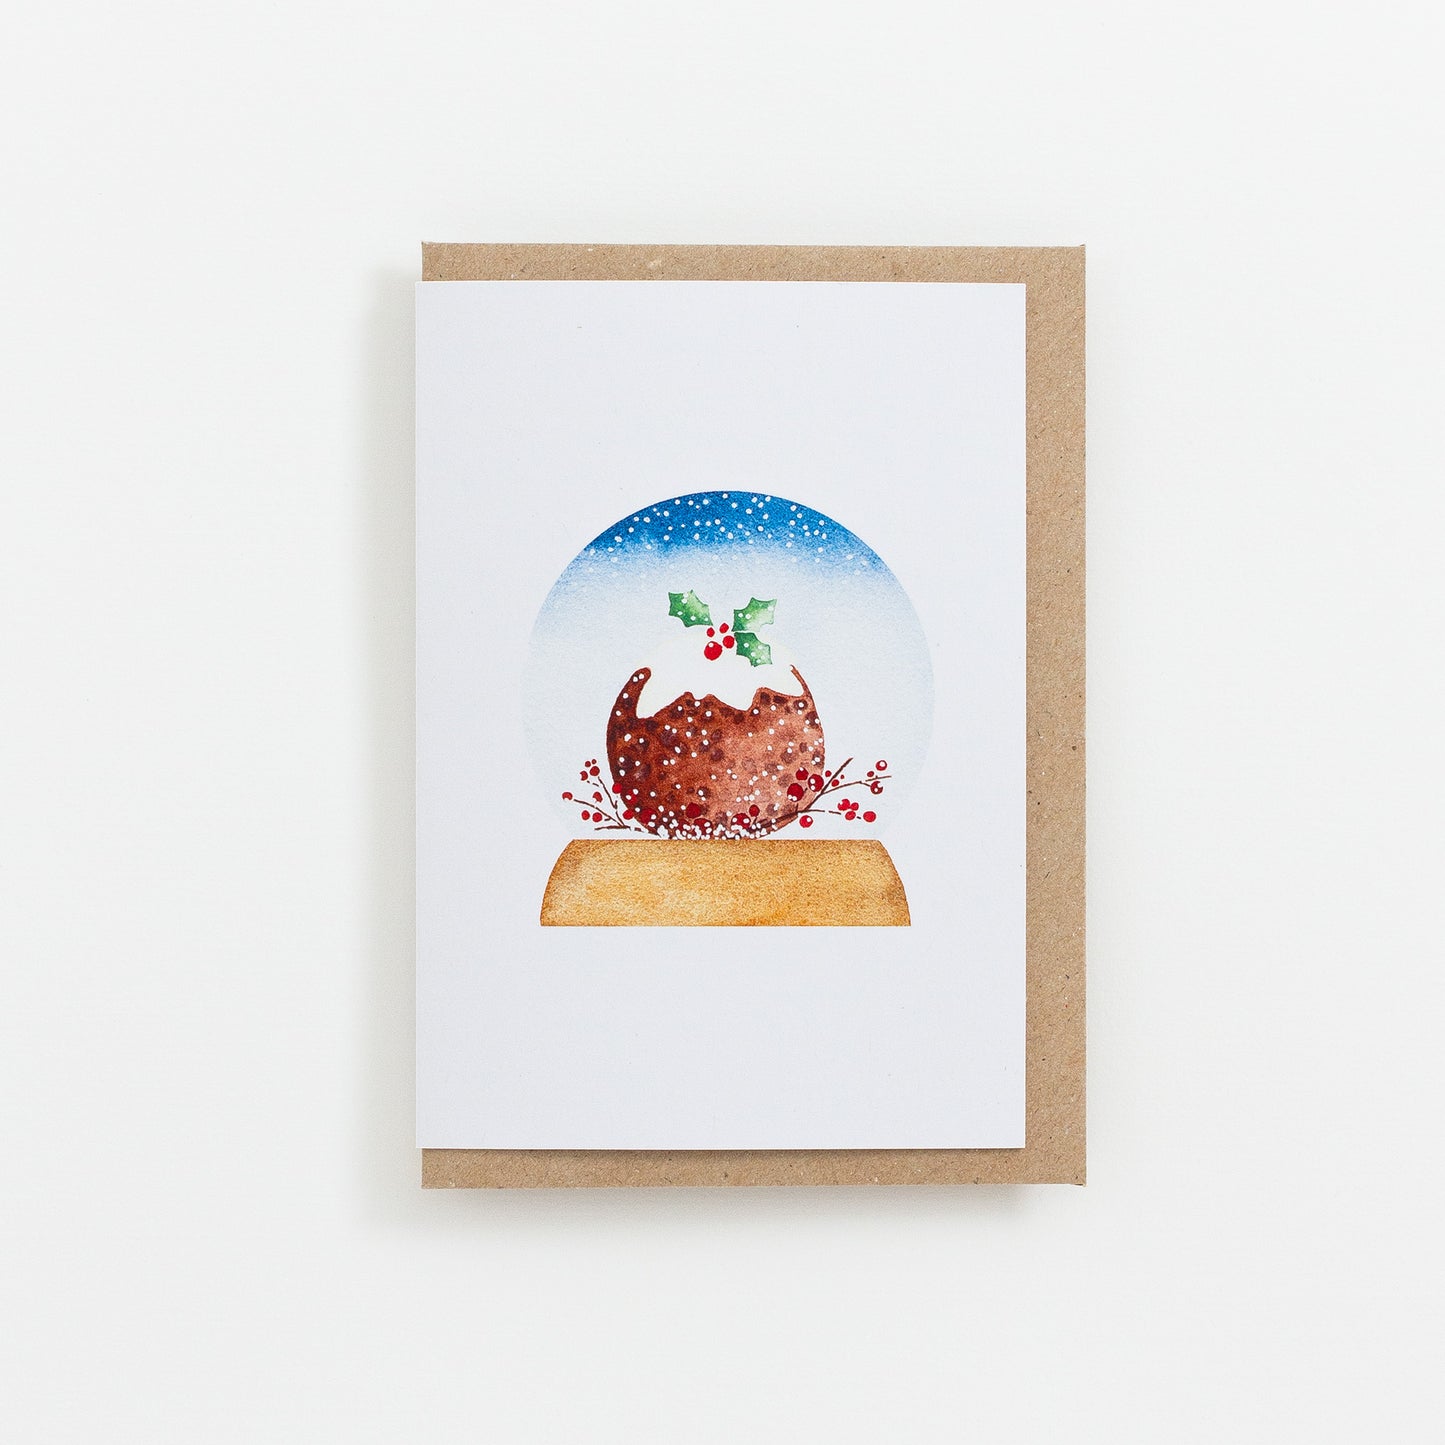 A festive food Snow Globe card designed from handmade watercolour painting. The illustration is a round Christmas pudding topped with icing and holly.